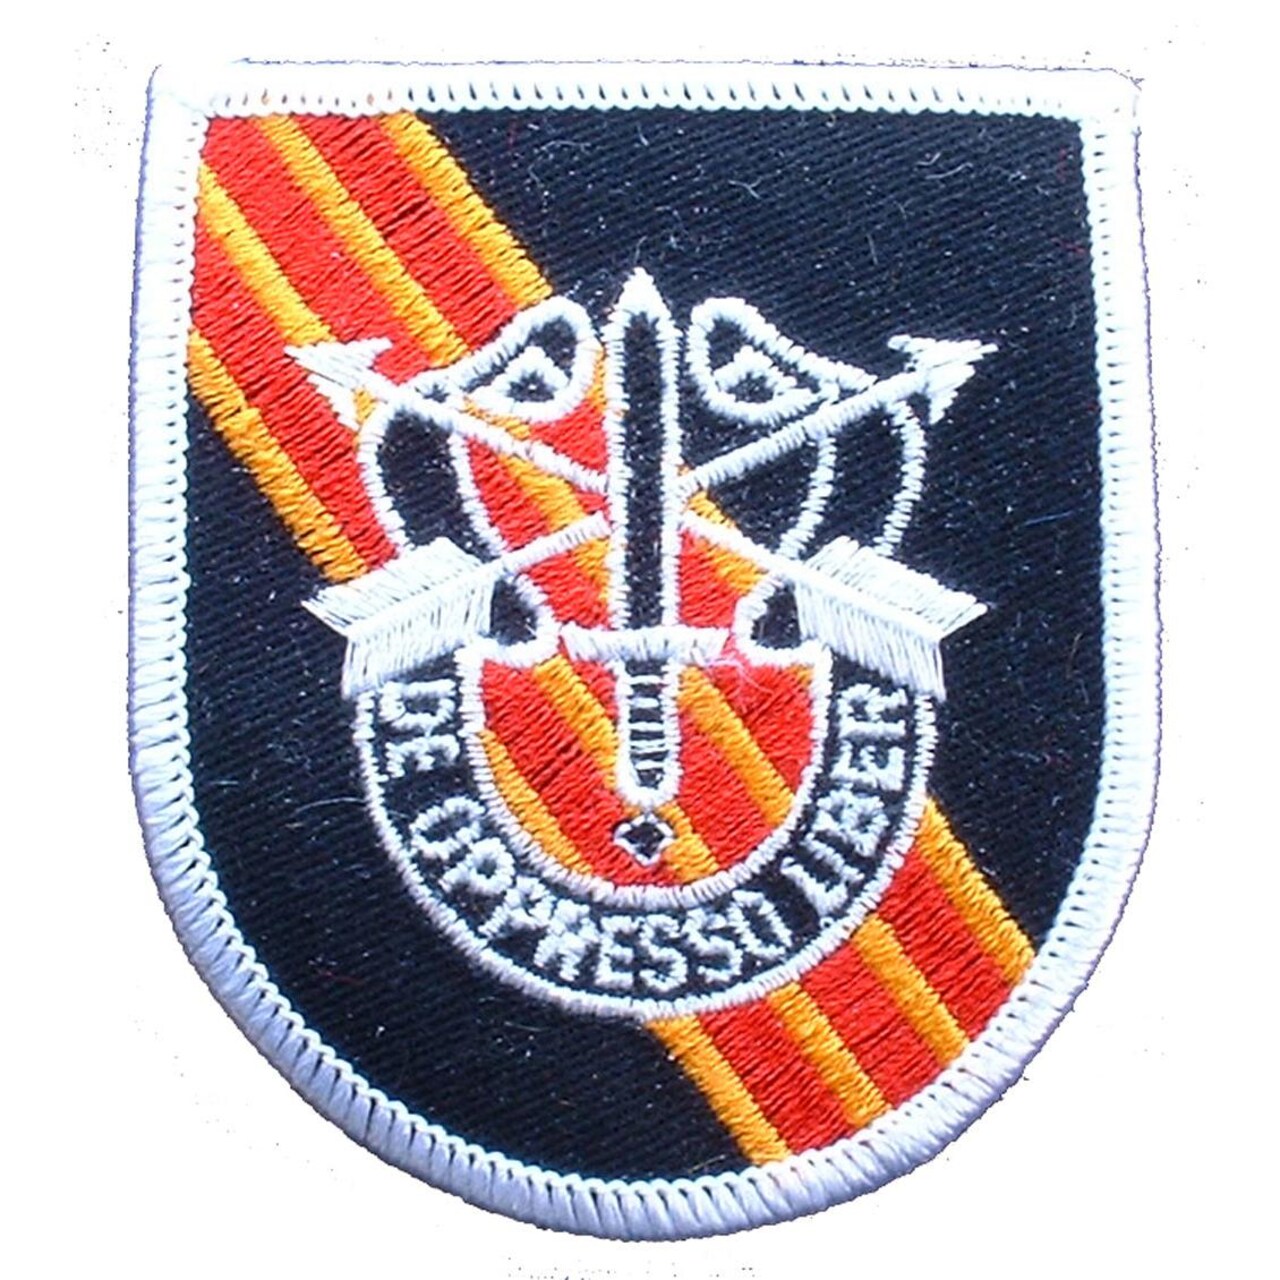 U.S. Army Special Forces De Oppresso Liber Patch